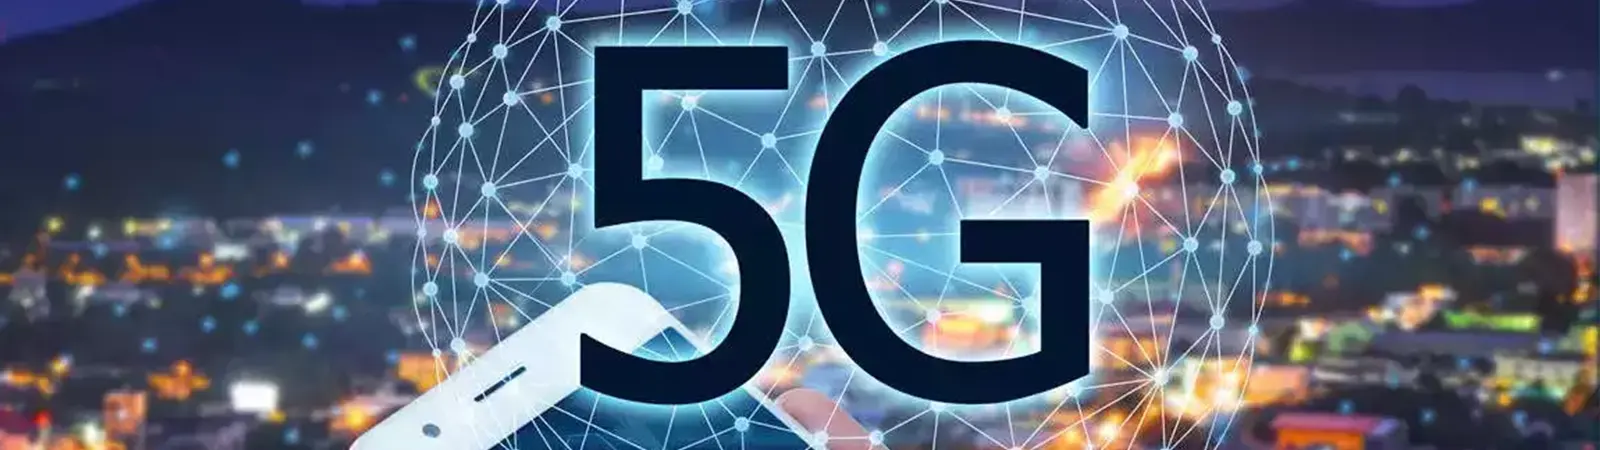 Launch Of The 5G Network (2018)